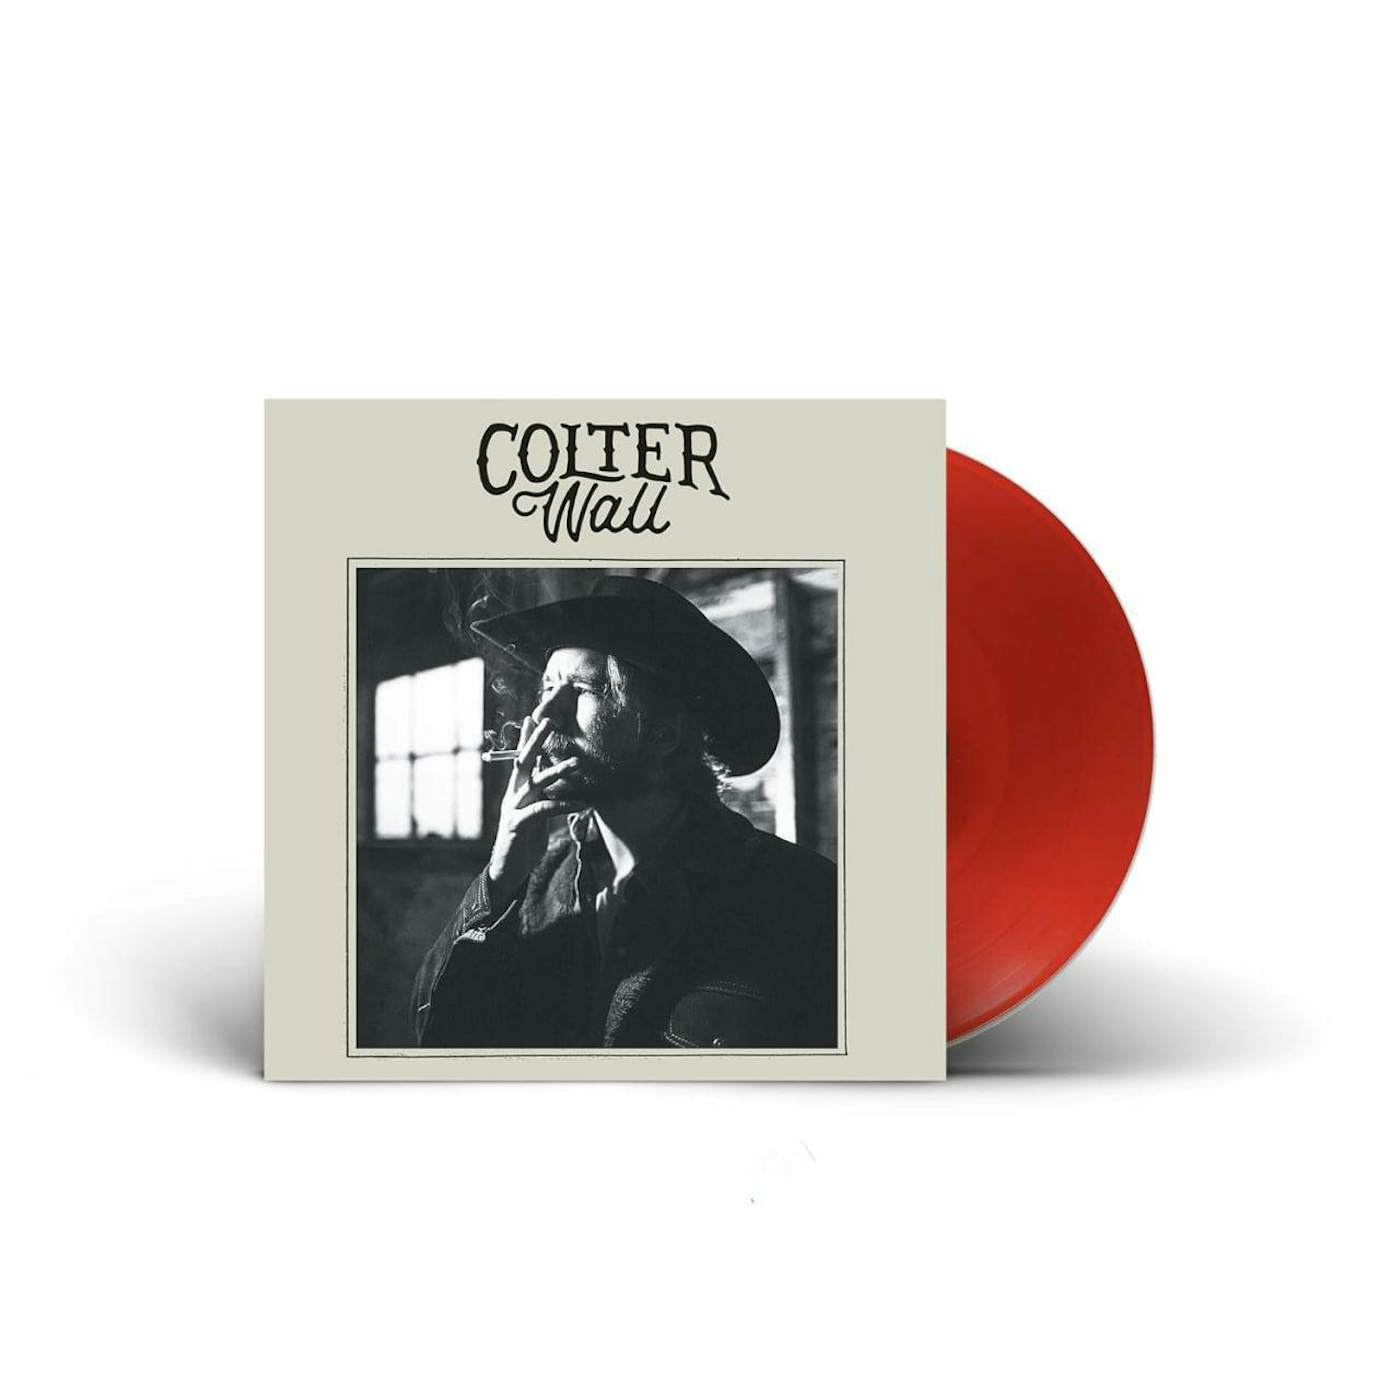  Colter Wall (Red) Vinyl Record